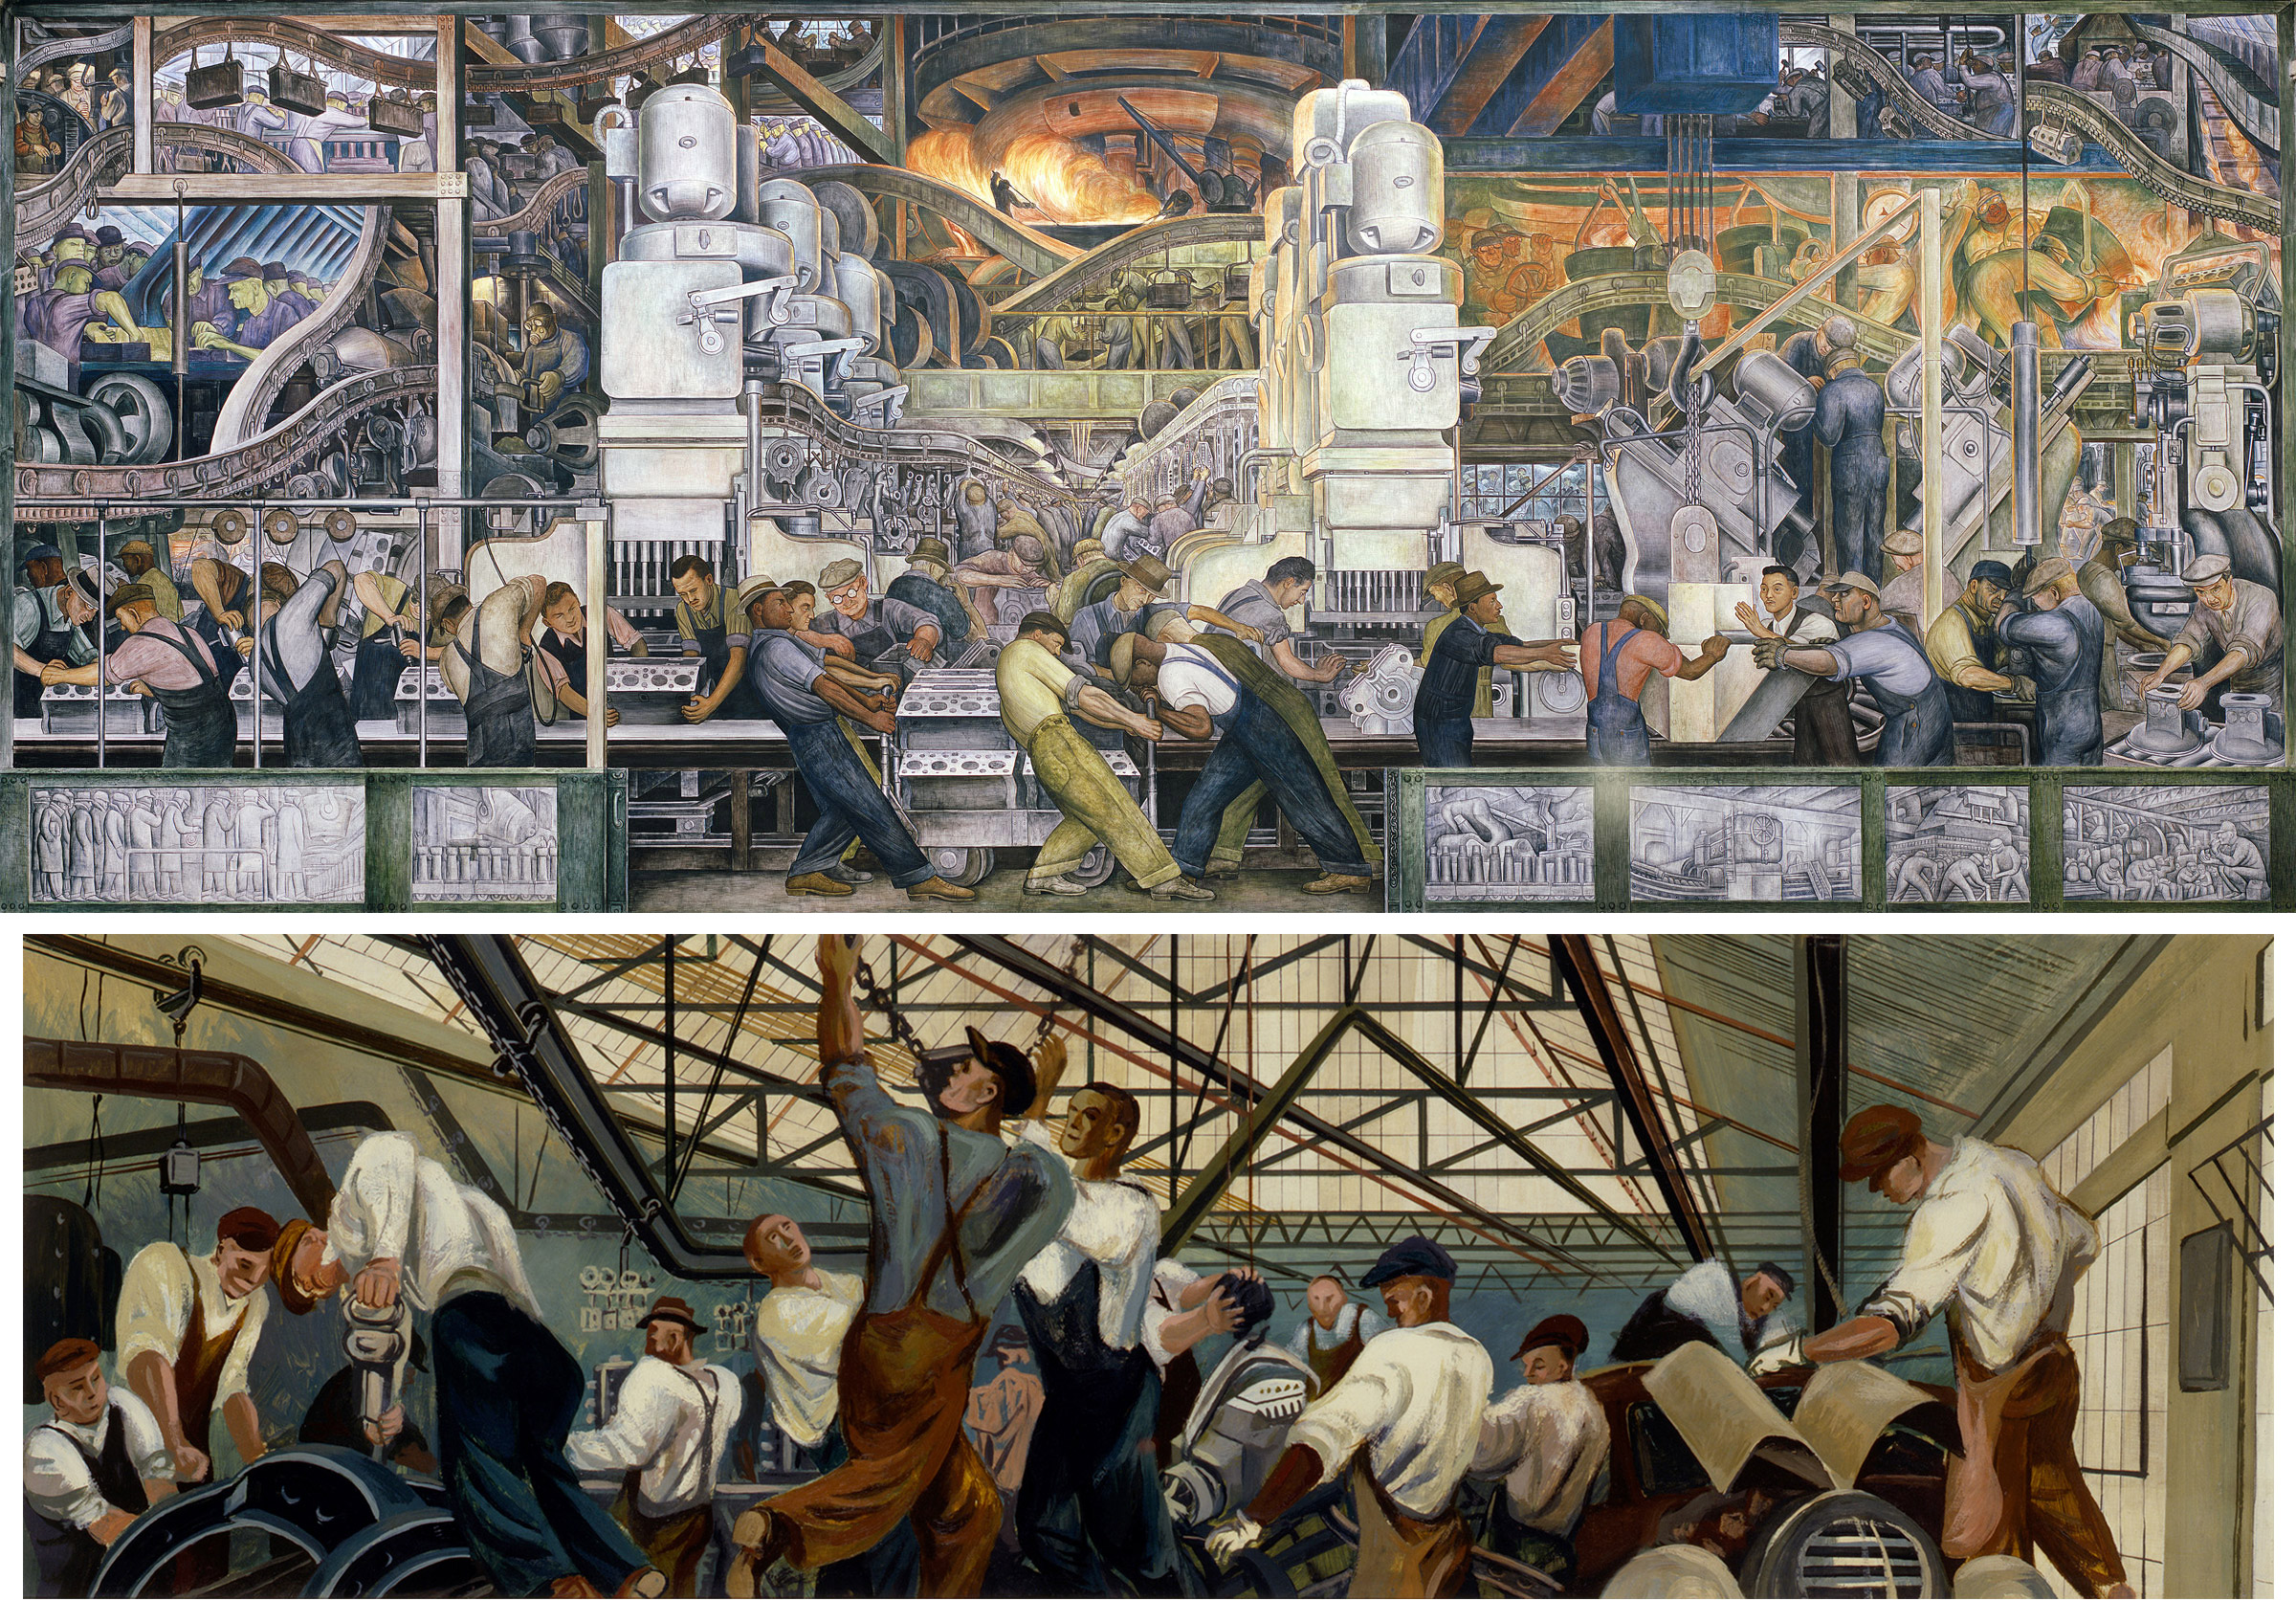 Left: Diego Rivera, Lower panel of Detroit Industry, North Wall, 1932–33; Right: William Gropper, Automobile Industry (mural study, Detroit, Michigan Post Office), 1940–41